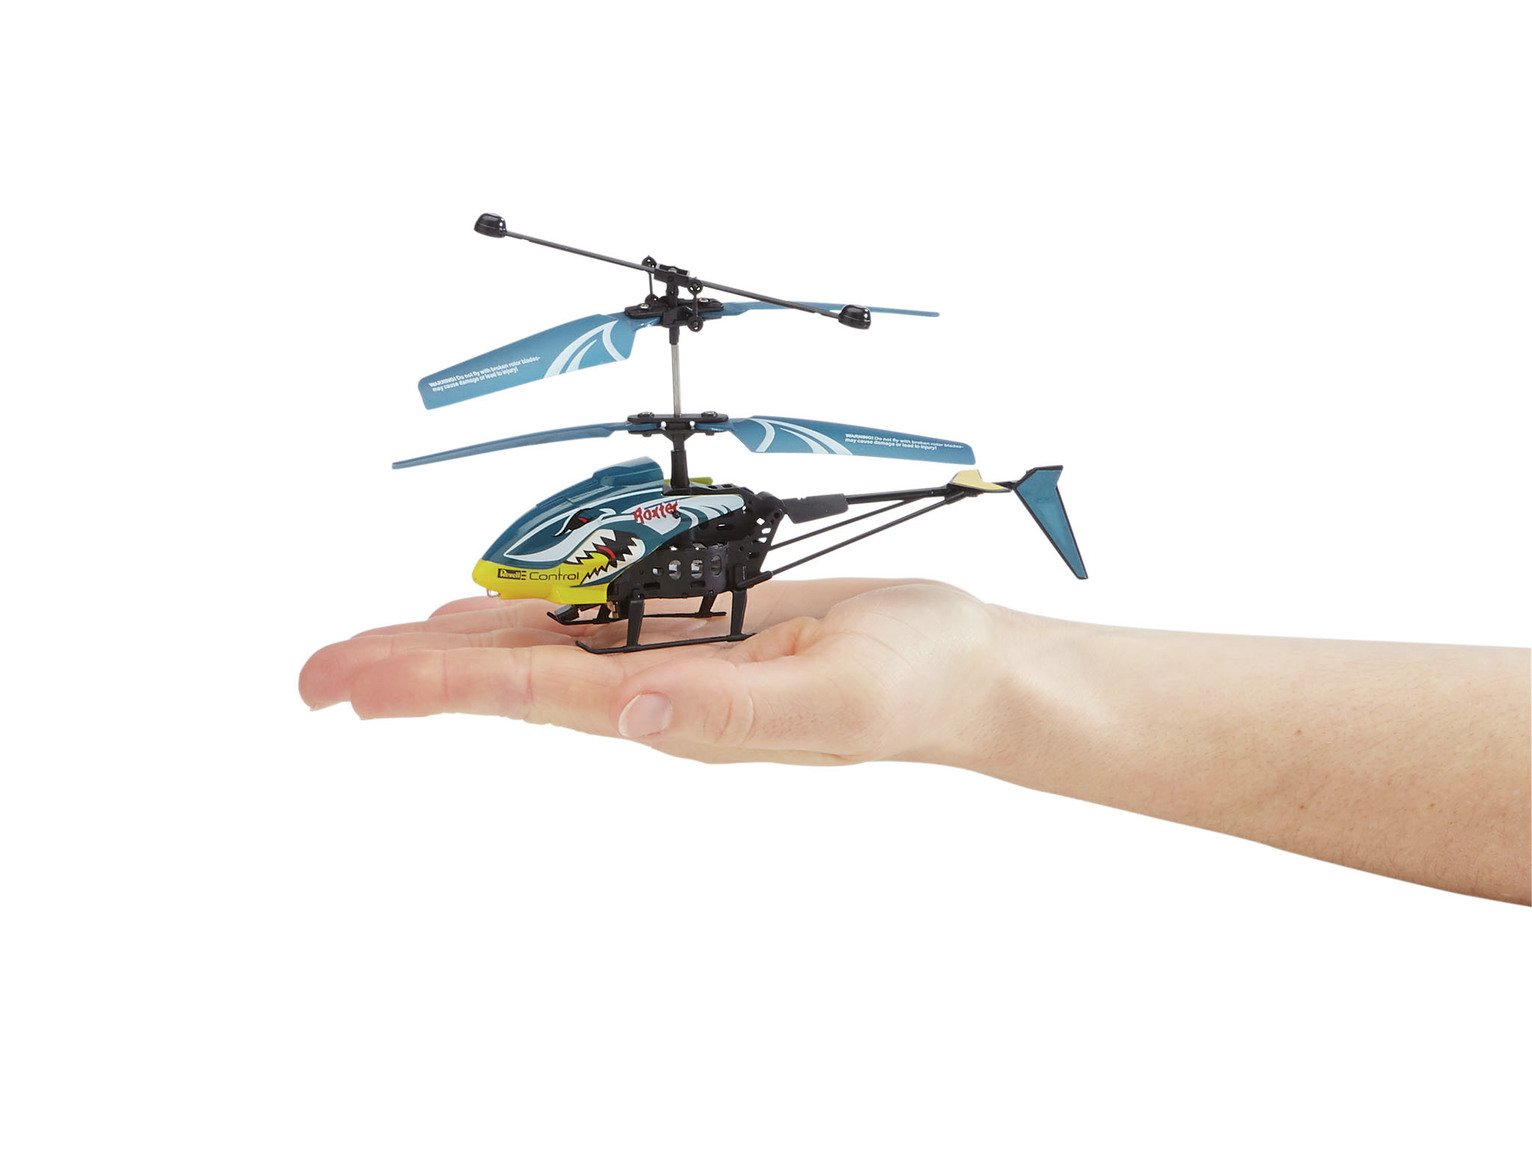 Revell Control RC Roxter Helicopter Review